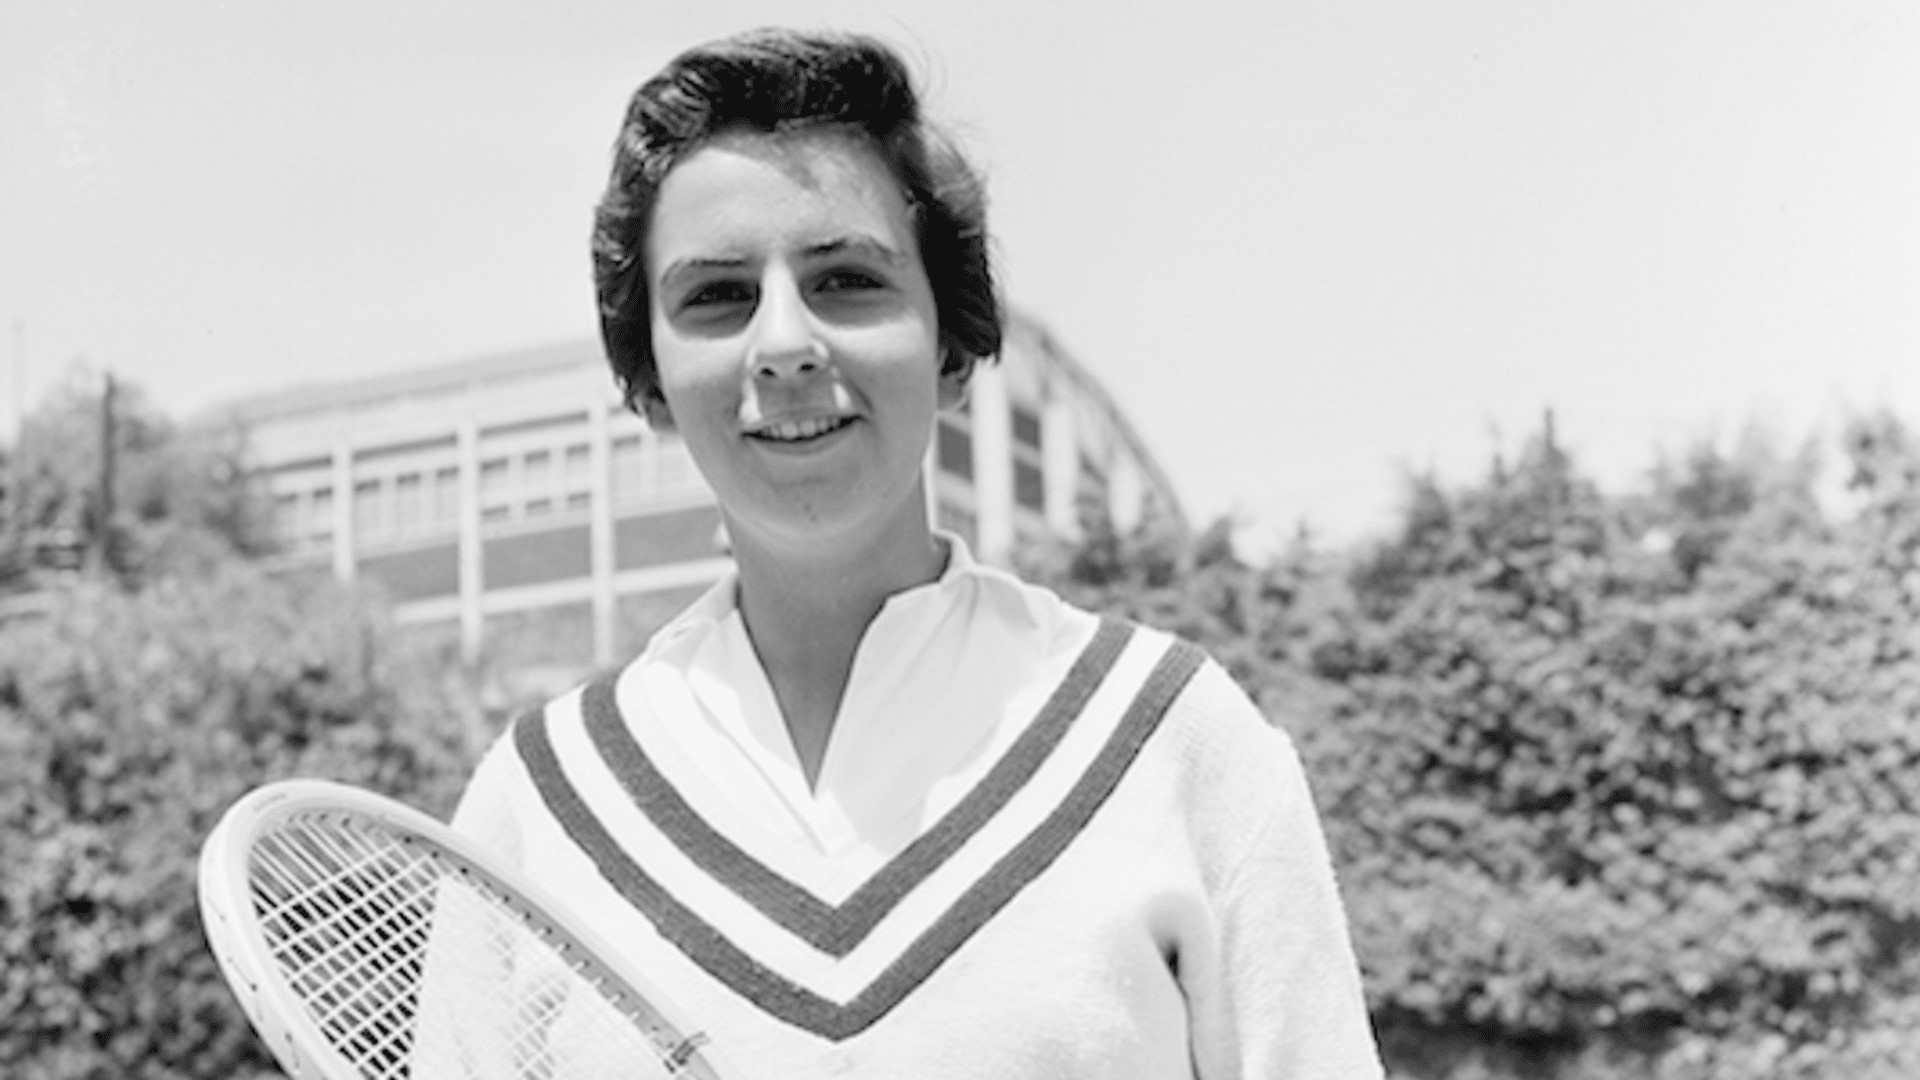 19 Facts About Maria Bueno - Facts.net